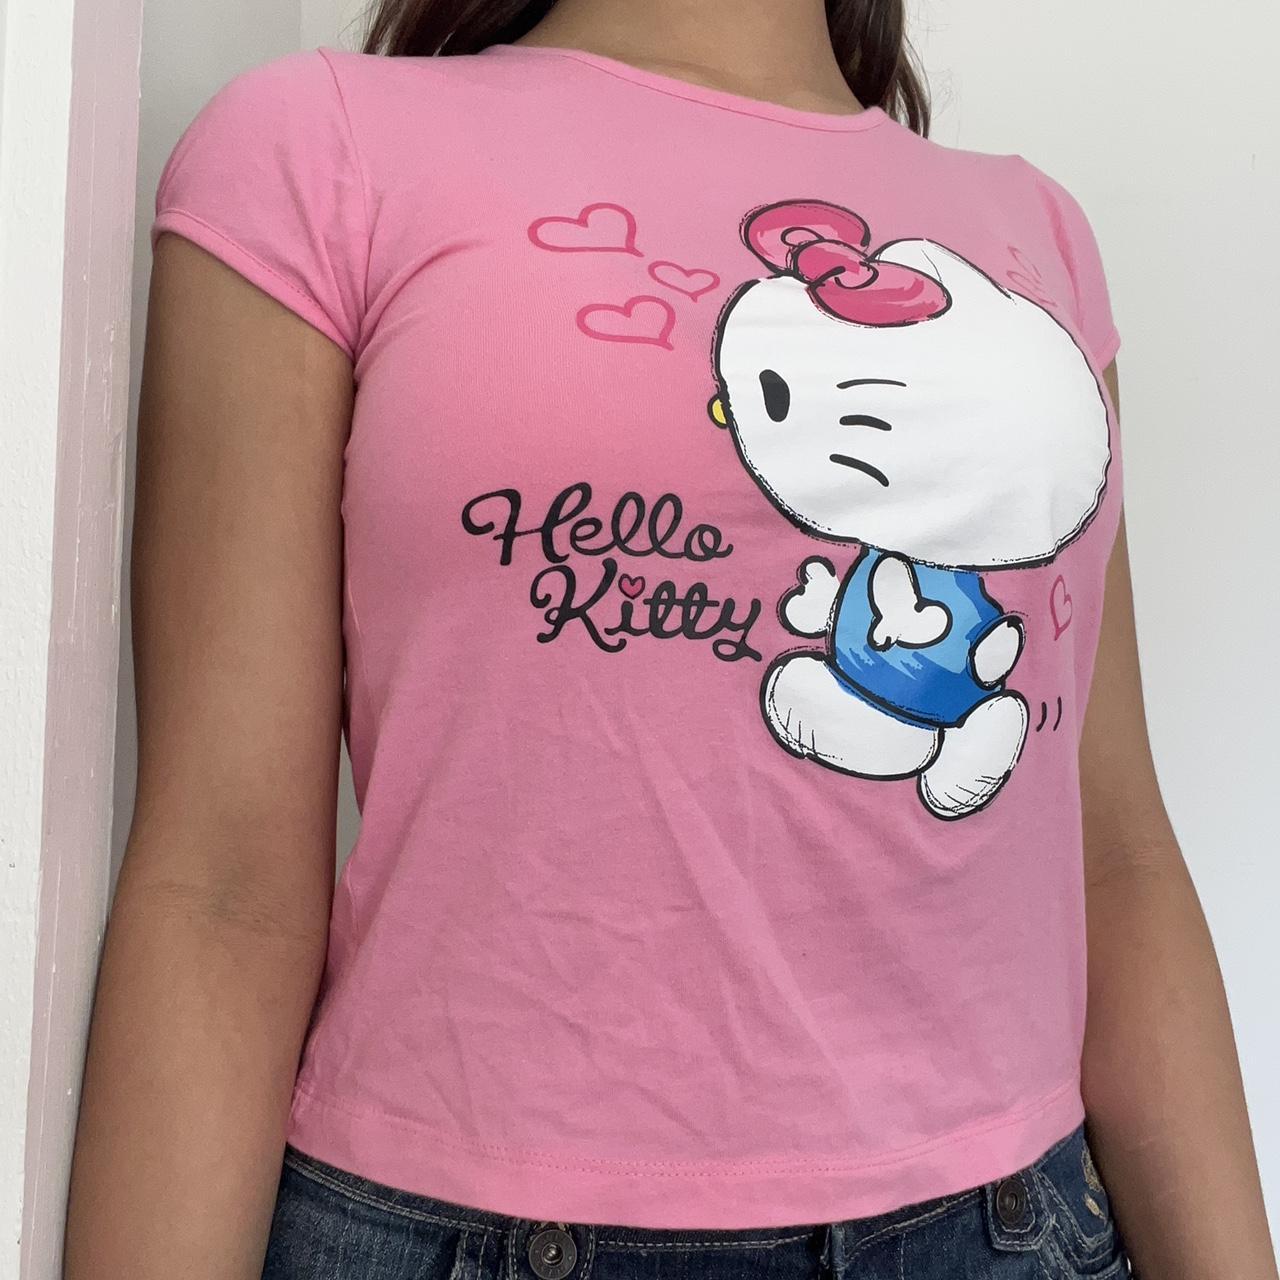 Hello kitty baby tee !! 🌸🌸🌸🪷🪷🪷 •print is in great... - Depop